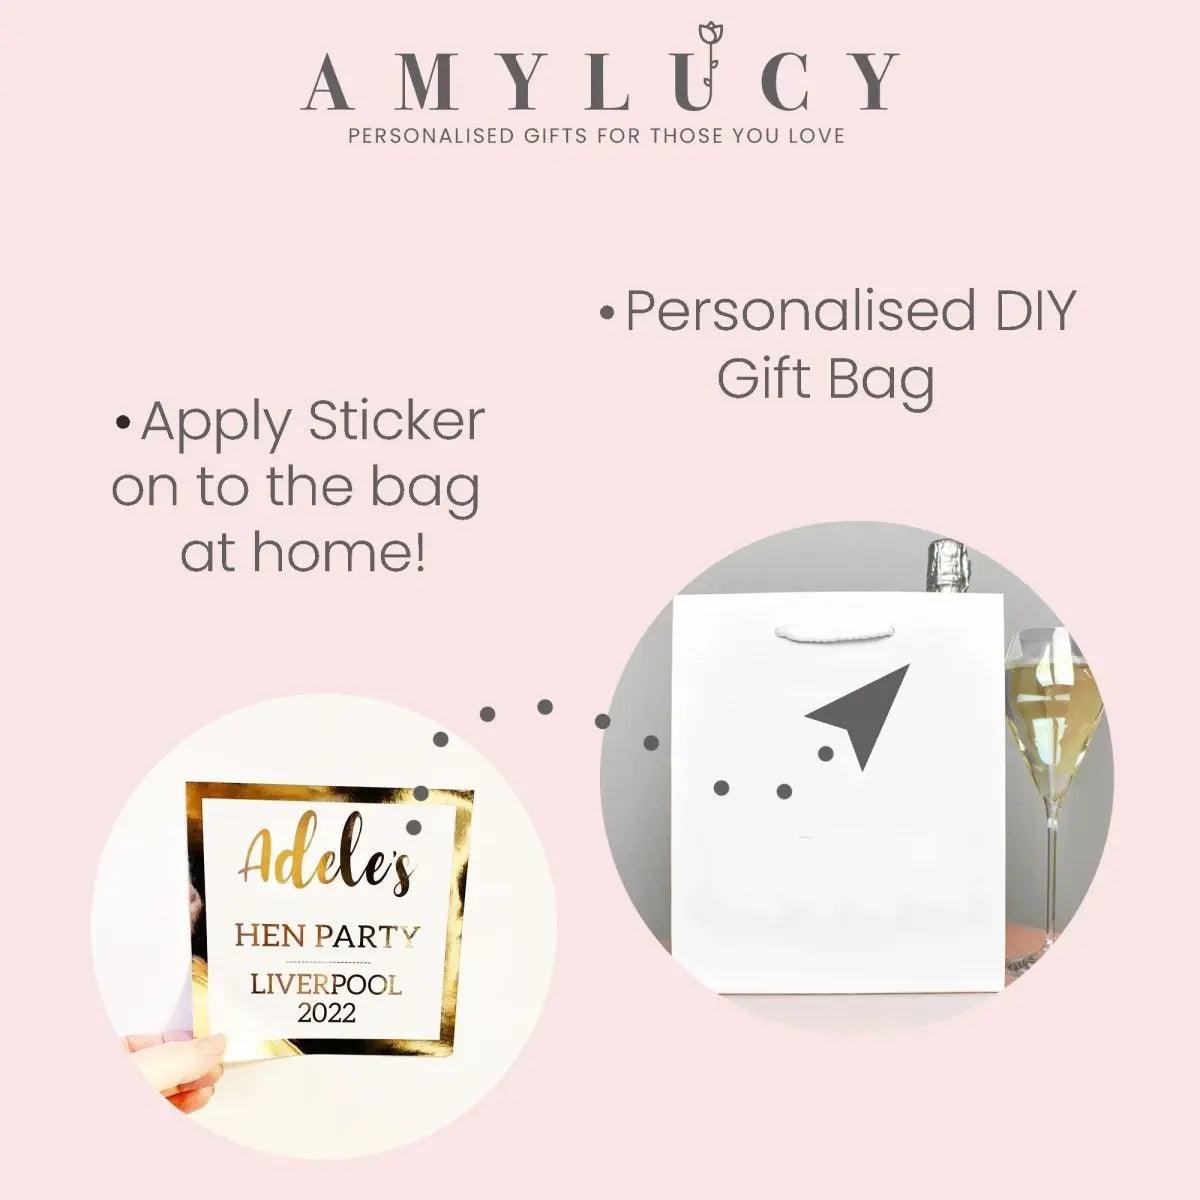 Gold Personalised Gift Bag, DIY Personalised Party Bag, Favour Bag, Gold Party Bags and Gifts, Gift Wrapping, Gift Bags, Hen Party Bag - Amy Lucy